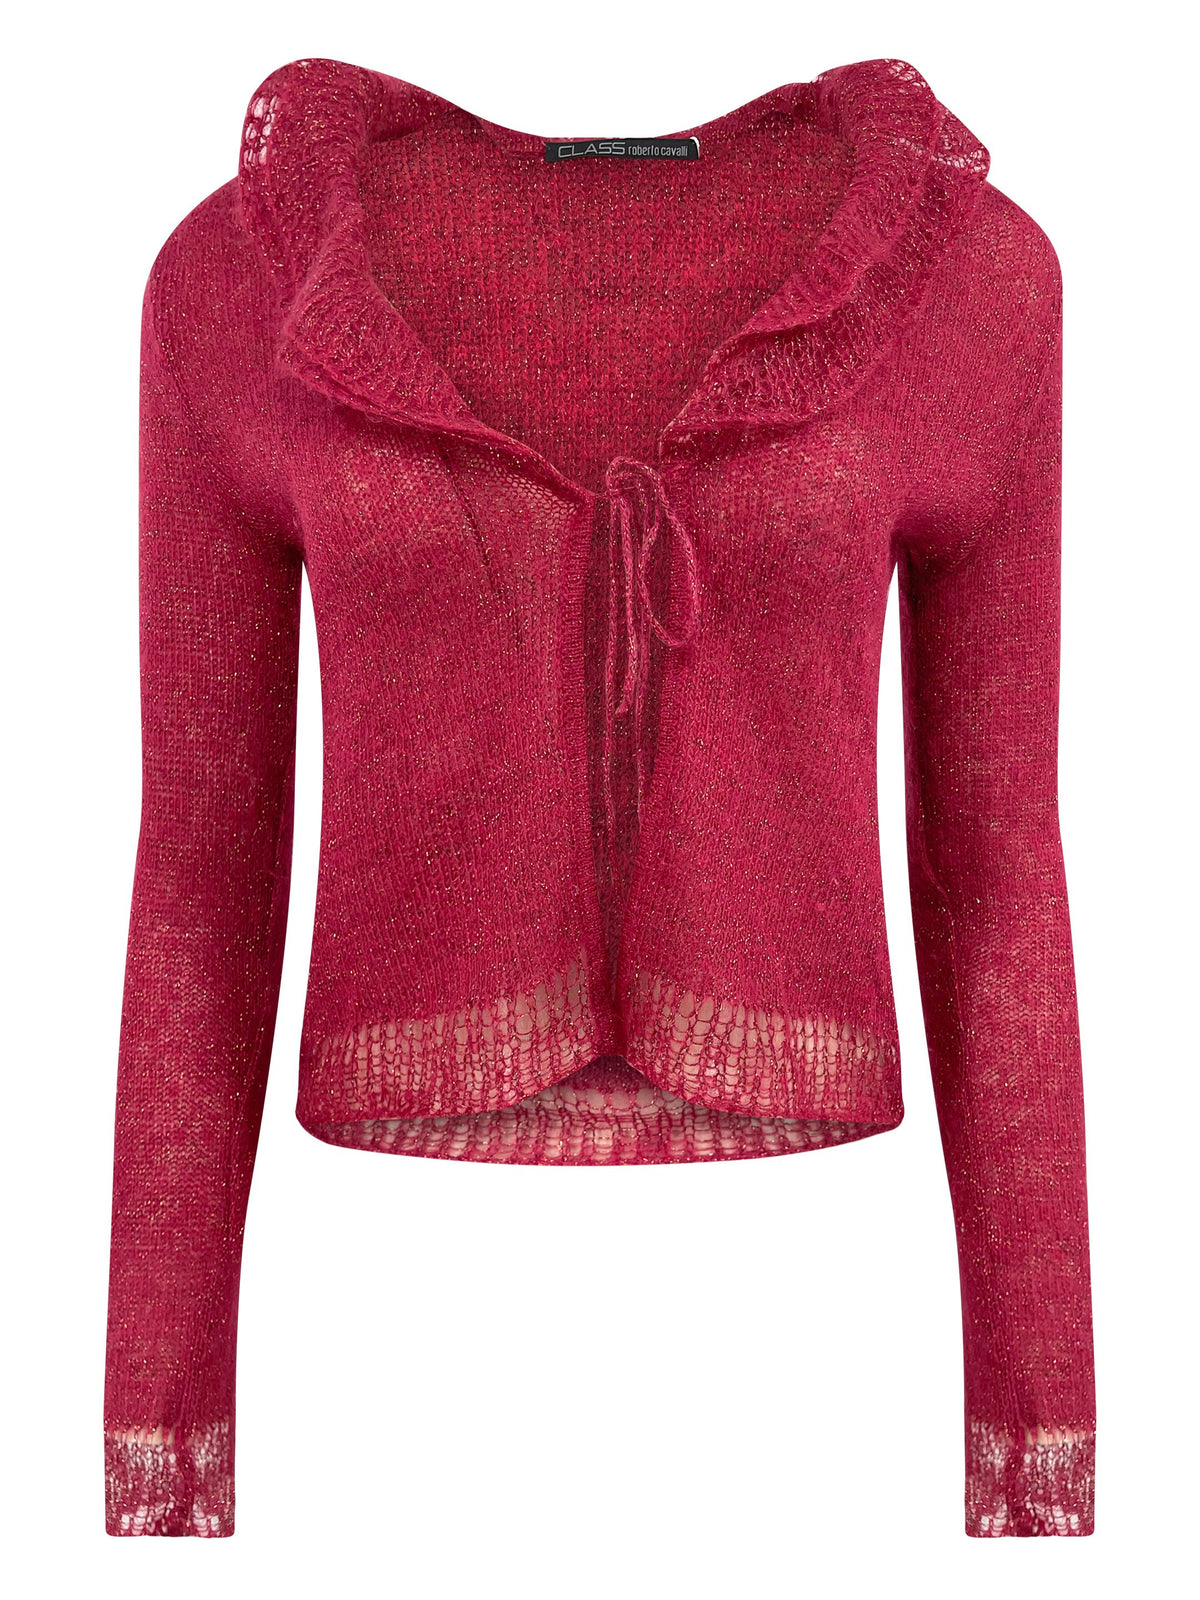 2000's Roberto Cavalli Tie Front Glitter Cardigan - ONFEMME By Lindsey's Kloset